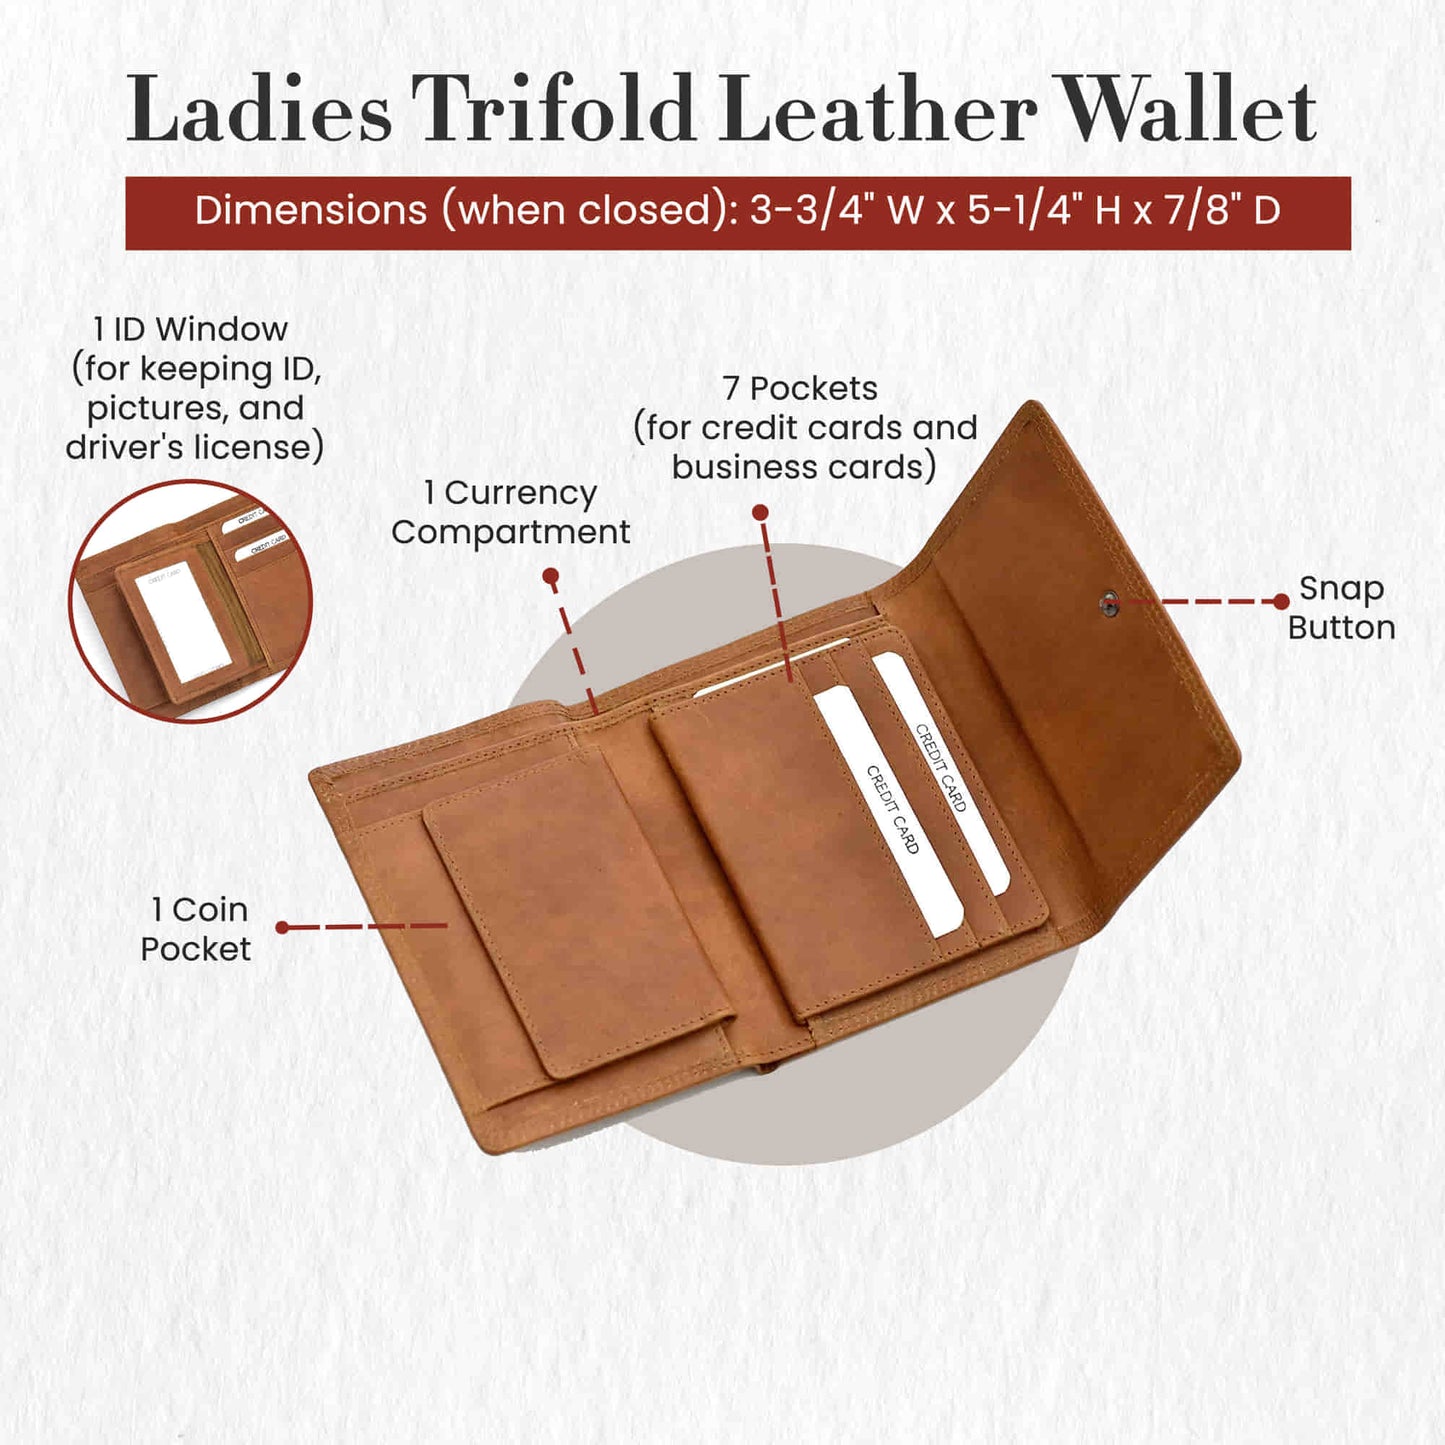 Style n Craft 300799-CG Ladies Trifold Leather Wallet with Snap Button Closure - Cognac Color - Open Angled View - Showing the Details